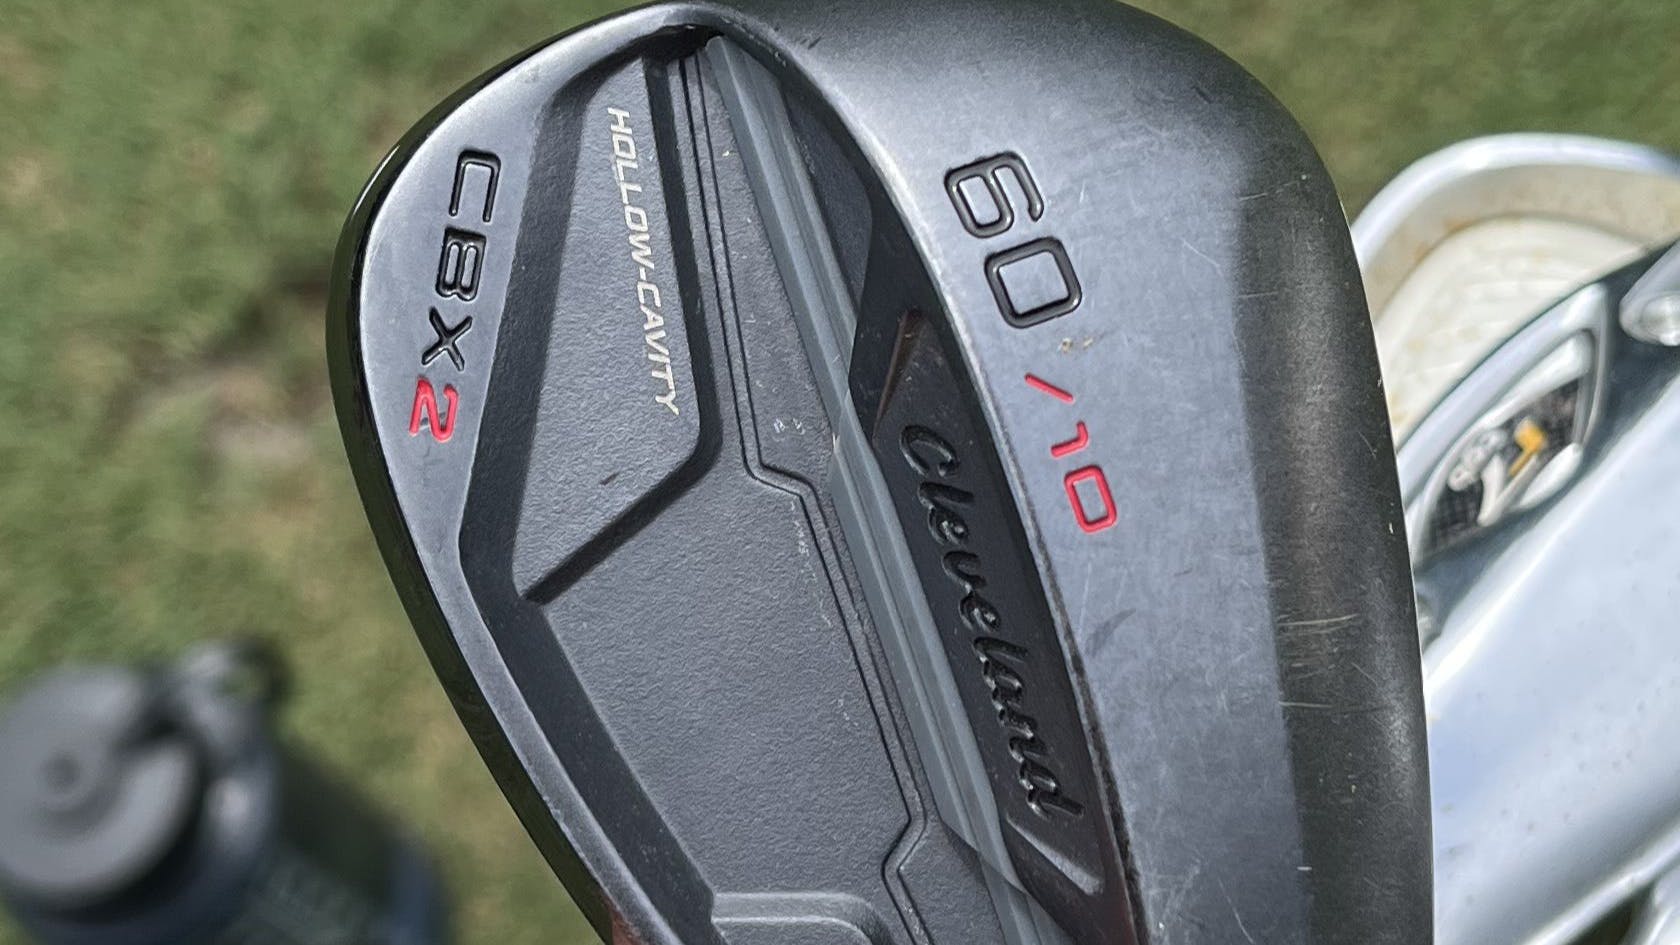 The Cleveland Golf CBX2 Wedge.